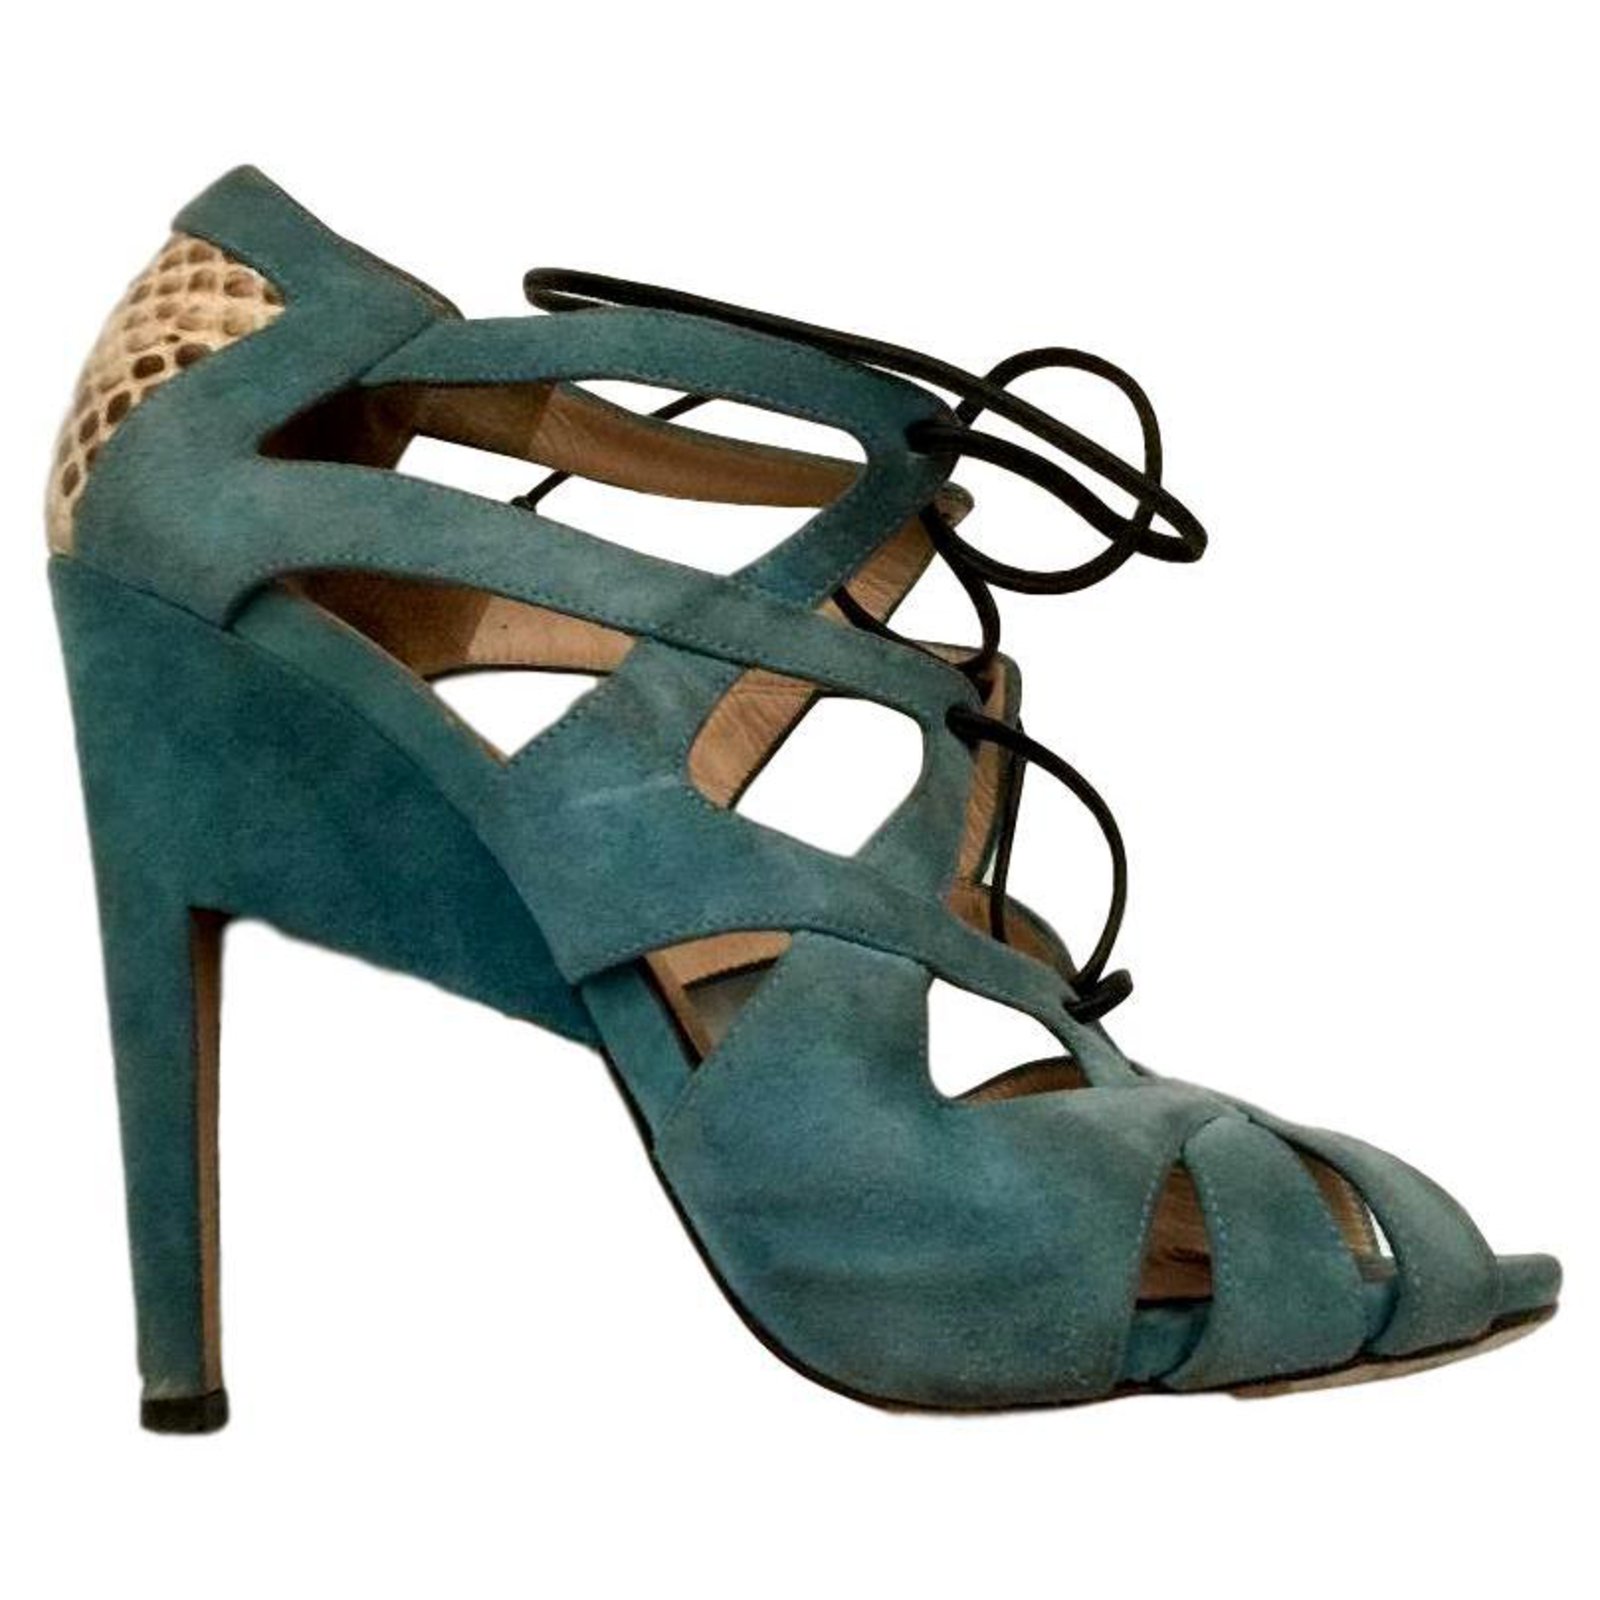 Nicholas Kirkwood Lace Up Suede Patent and Metallic Leather Heels